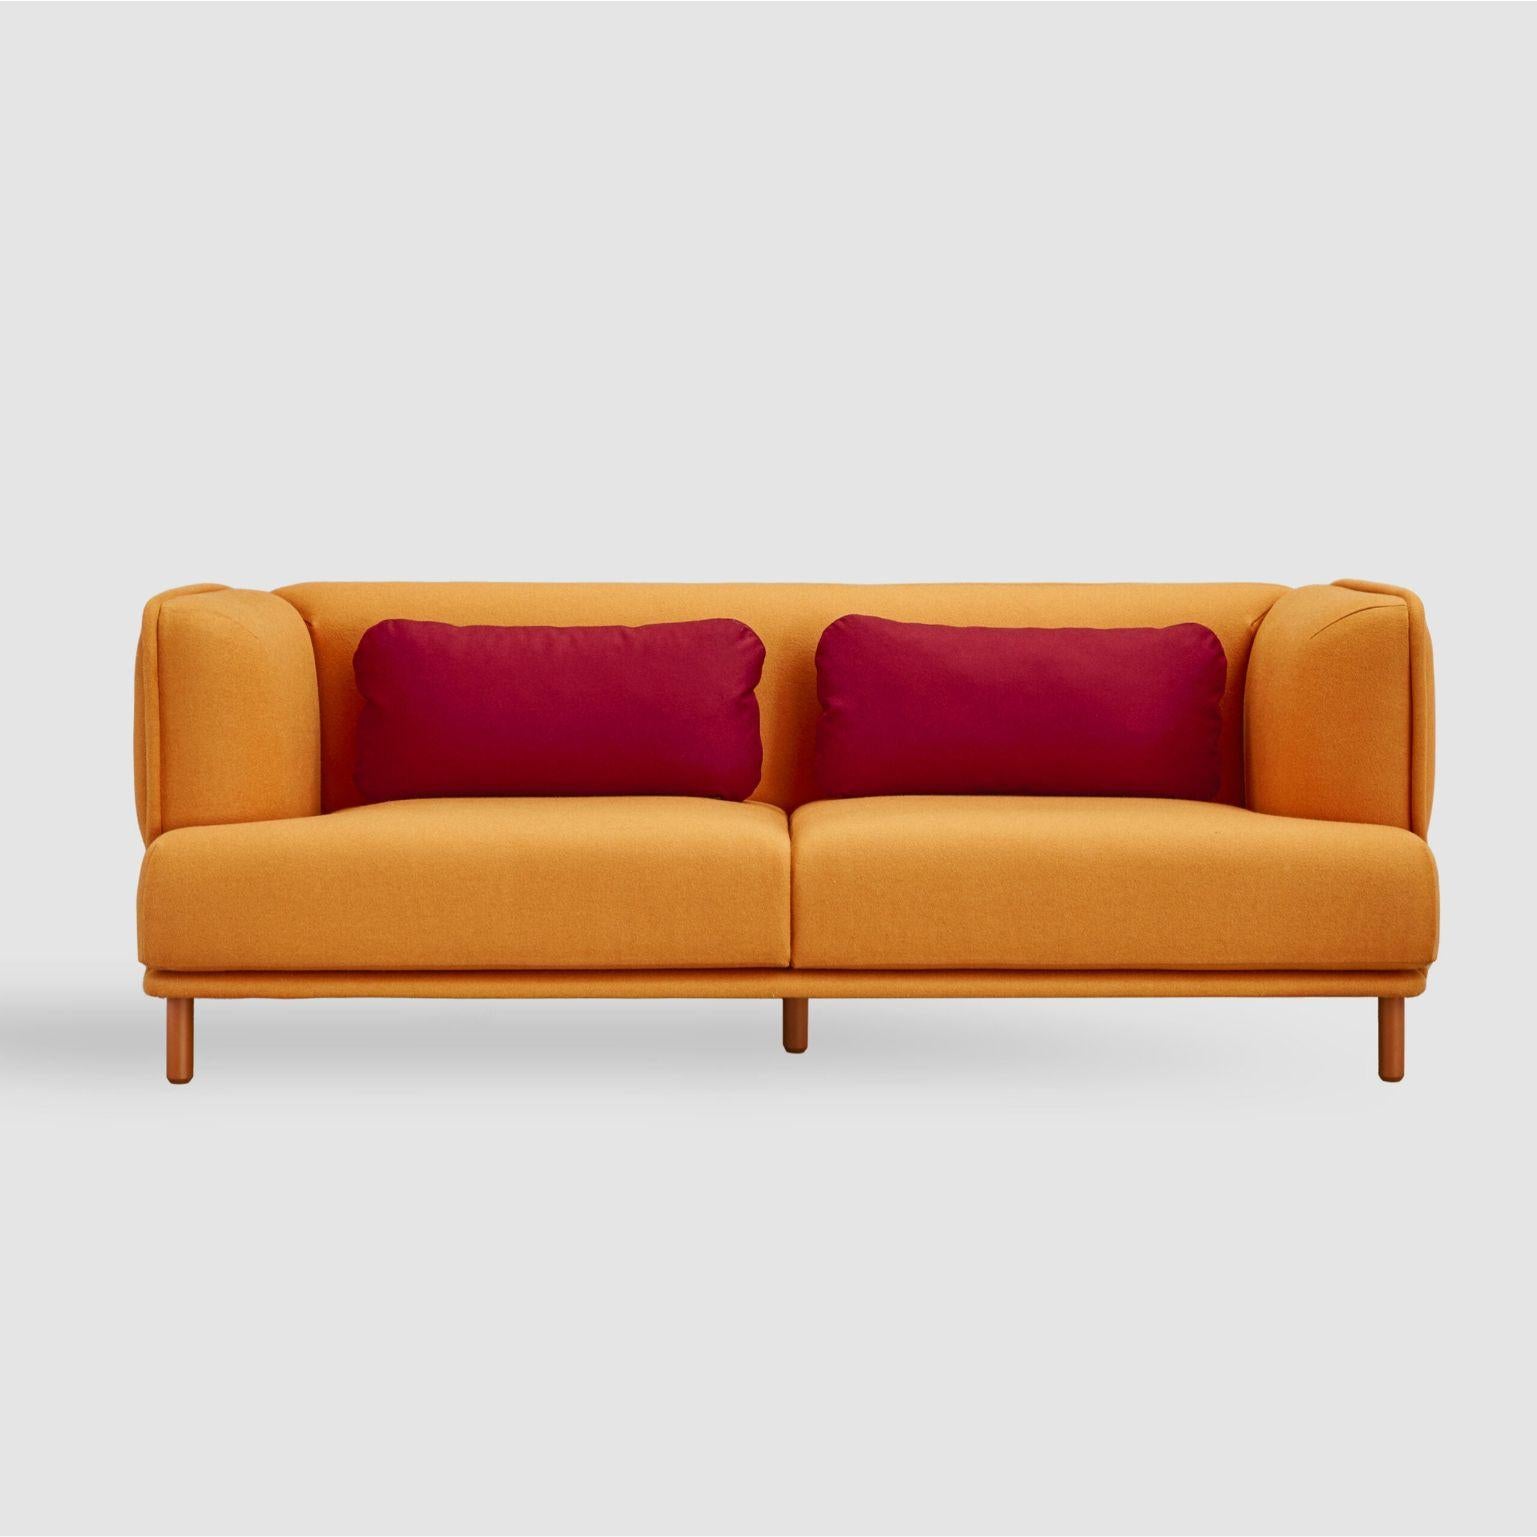 Hug sofa - 2 seaters by Cristian Reyes
Dimensions: W168, D95, H73, Seat43
Materials: Pine wood structure reinforced with plywood and tablex
Backrest is 50% goose feather and 50% polyester fibre
Foam CMHR (high resilience and flame retardant) for